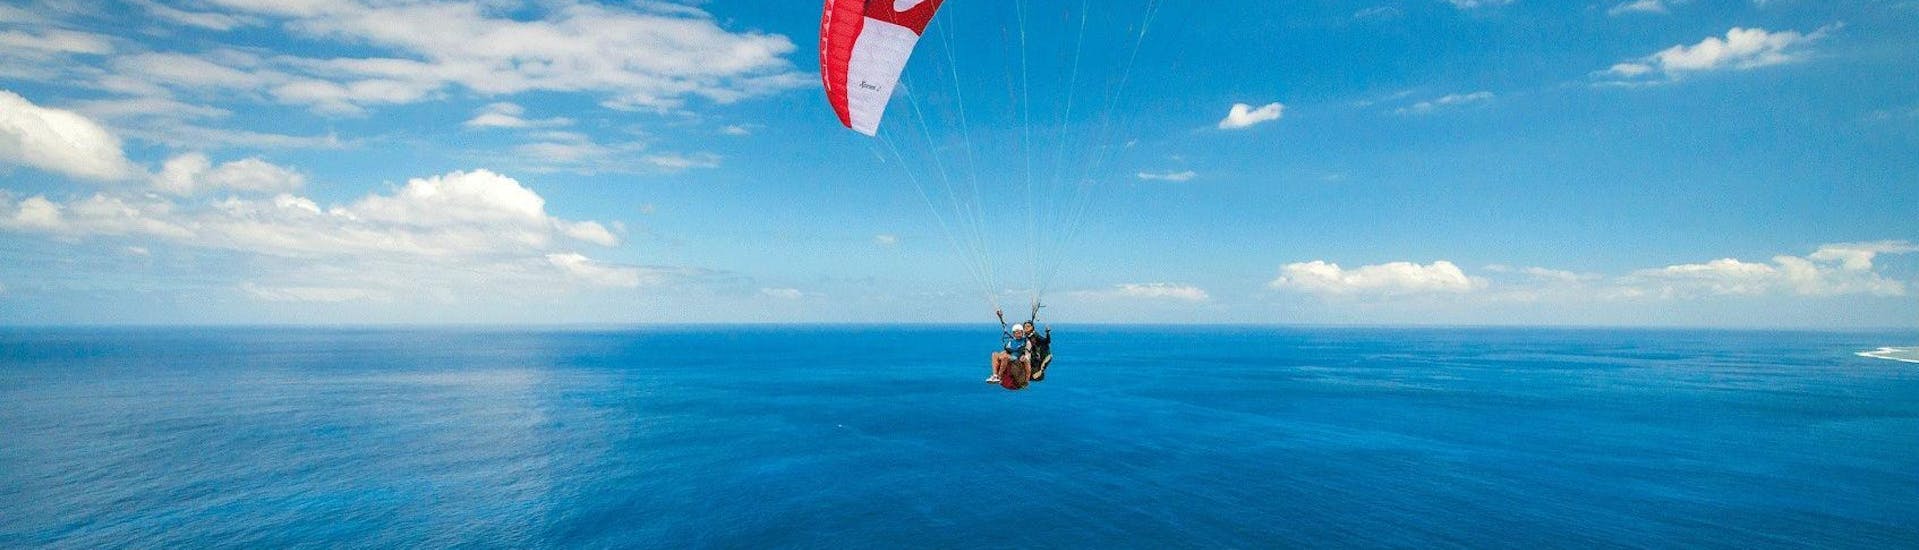 A paraglider pilot from Addict Parapente is doing a tandem paragliding flight in the blue sky of Reunion Islan